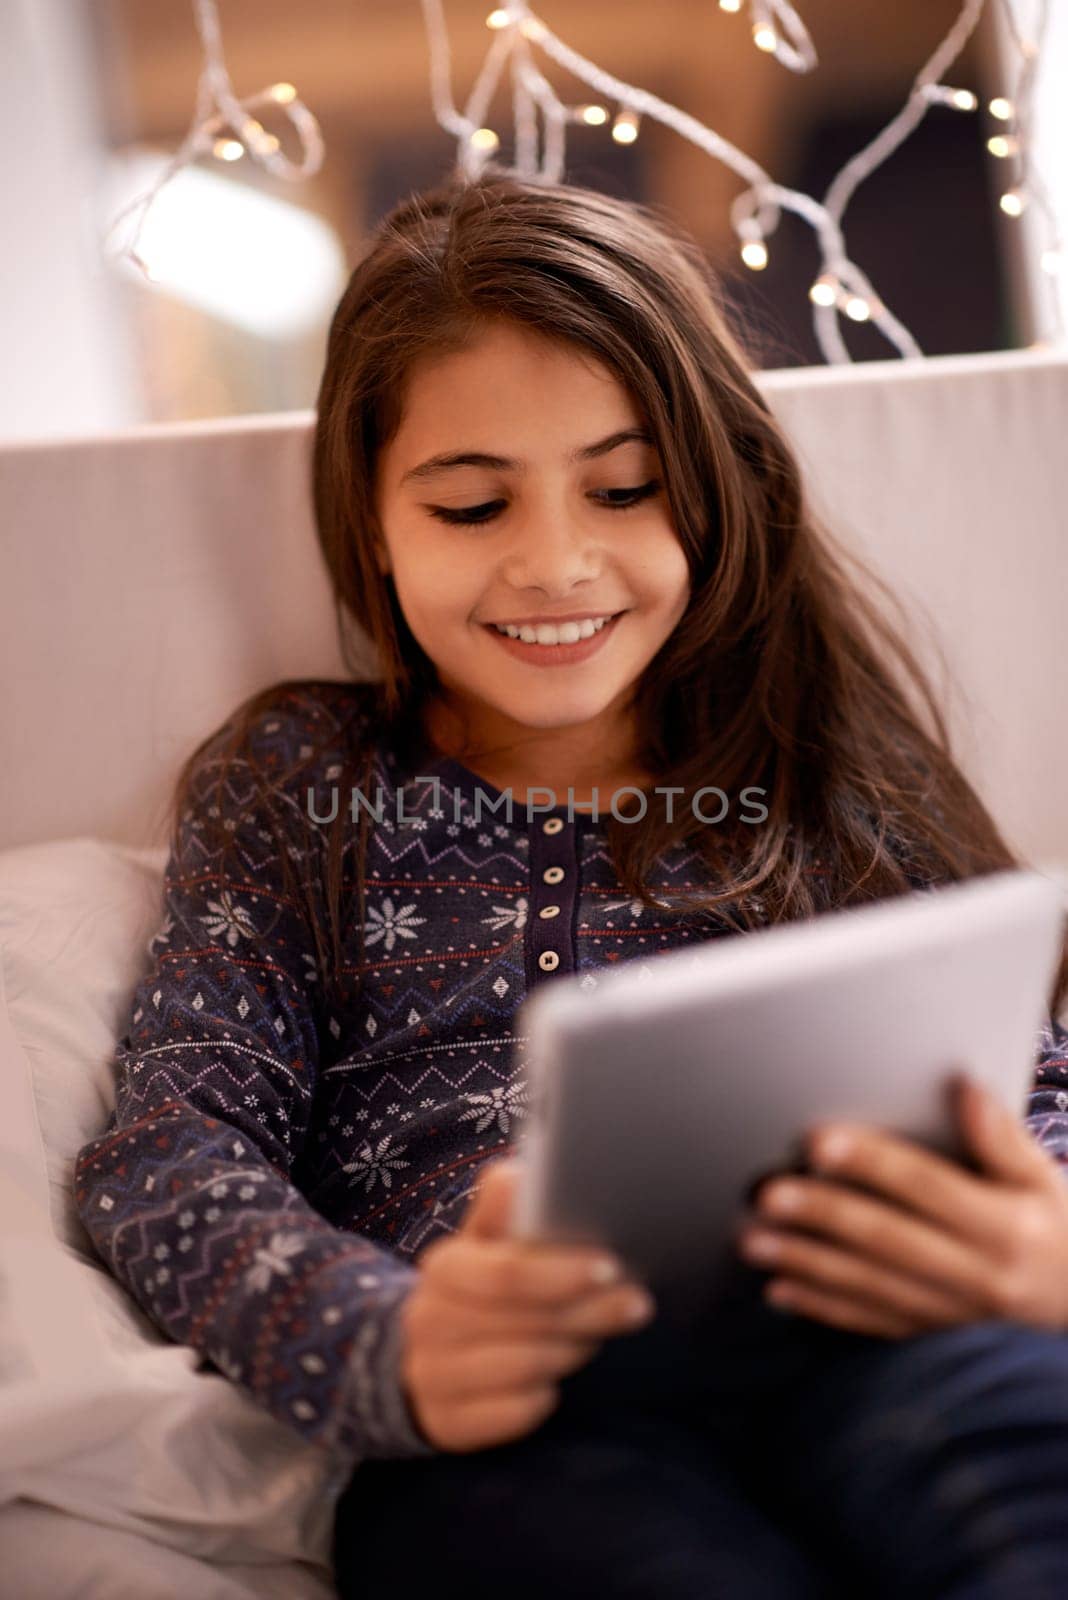 Girl, kid and tablet, technology and communication with ebook for reading and social media at home. Elearning, movie or storytelling app with internet, browsing and digital platform for gaming.